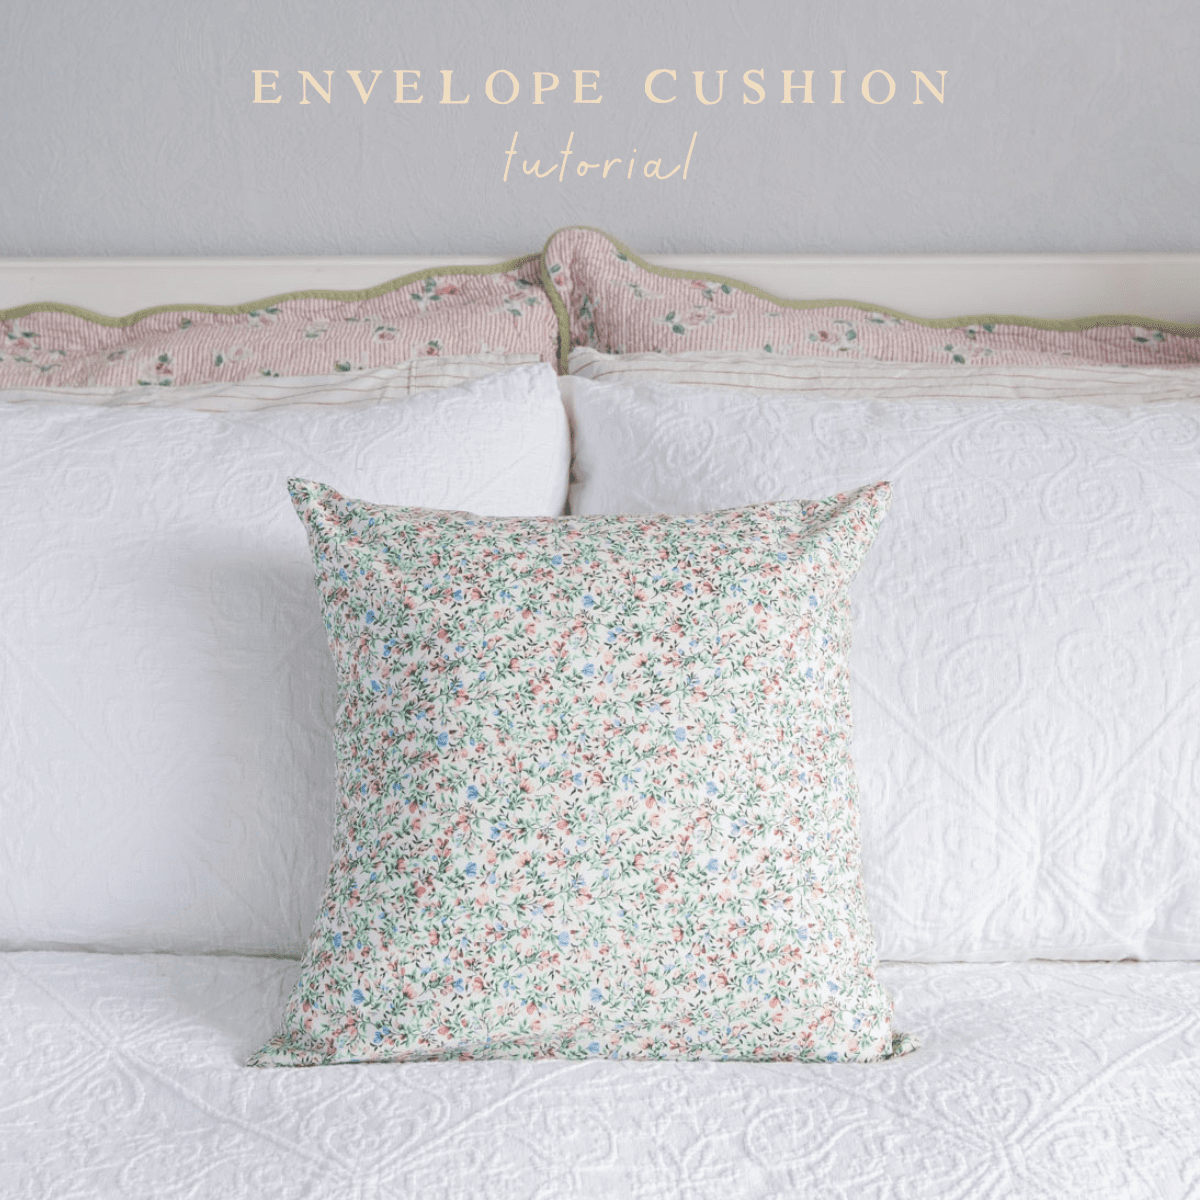 How to Make Cushion Covers – 10 Minute Envelope Cushions